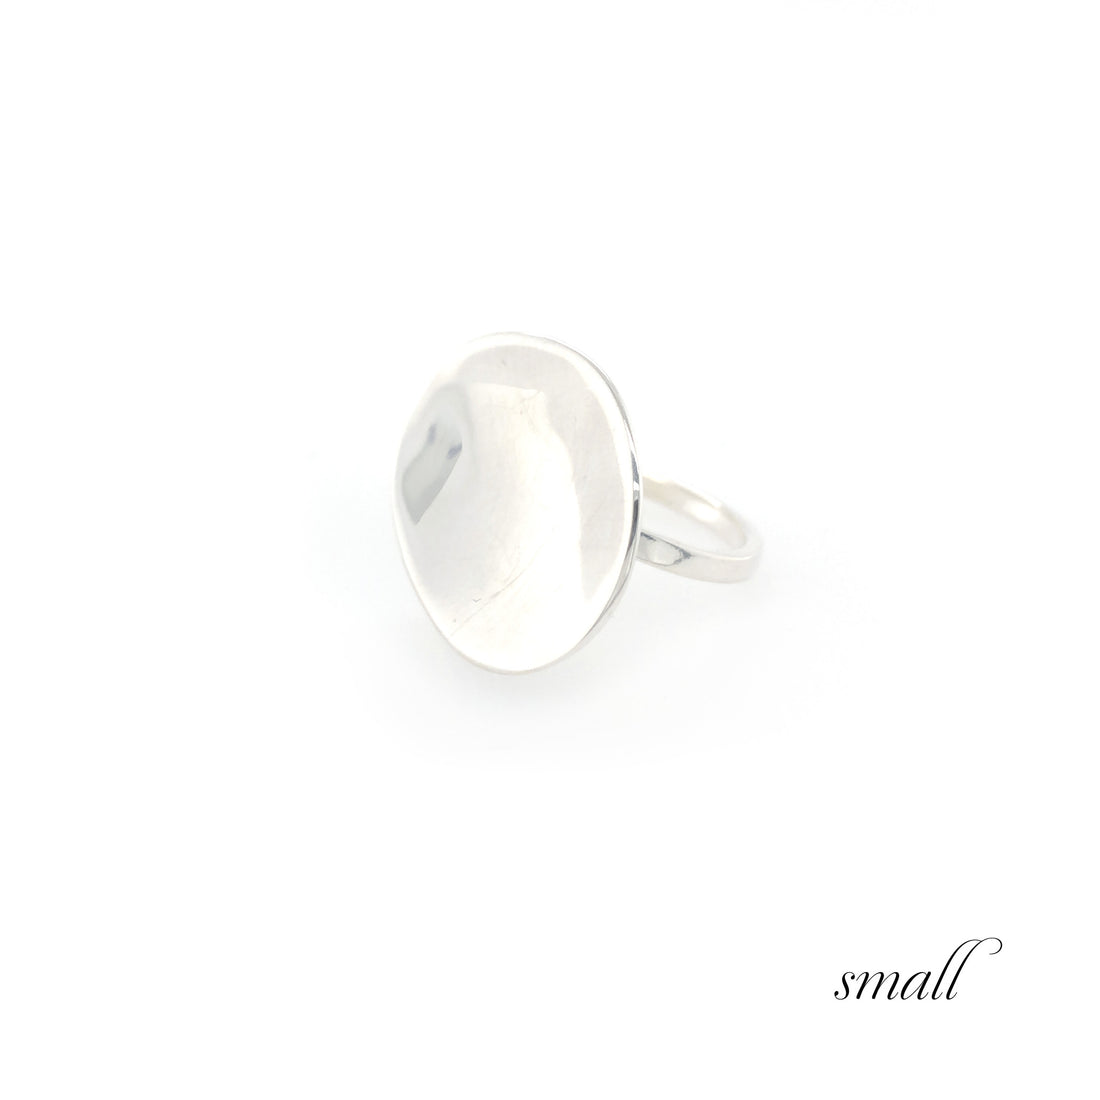 Andante ring size small.